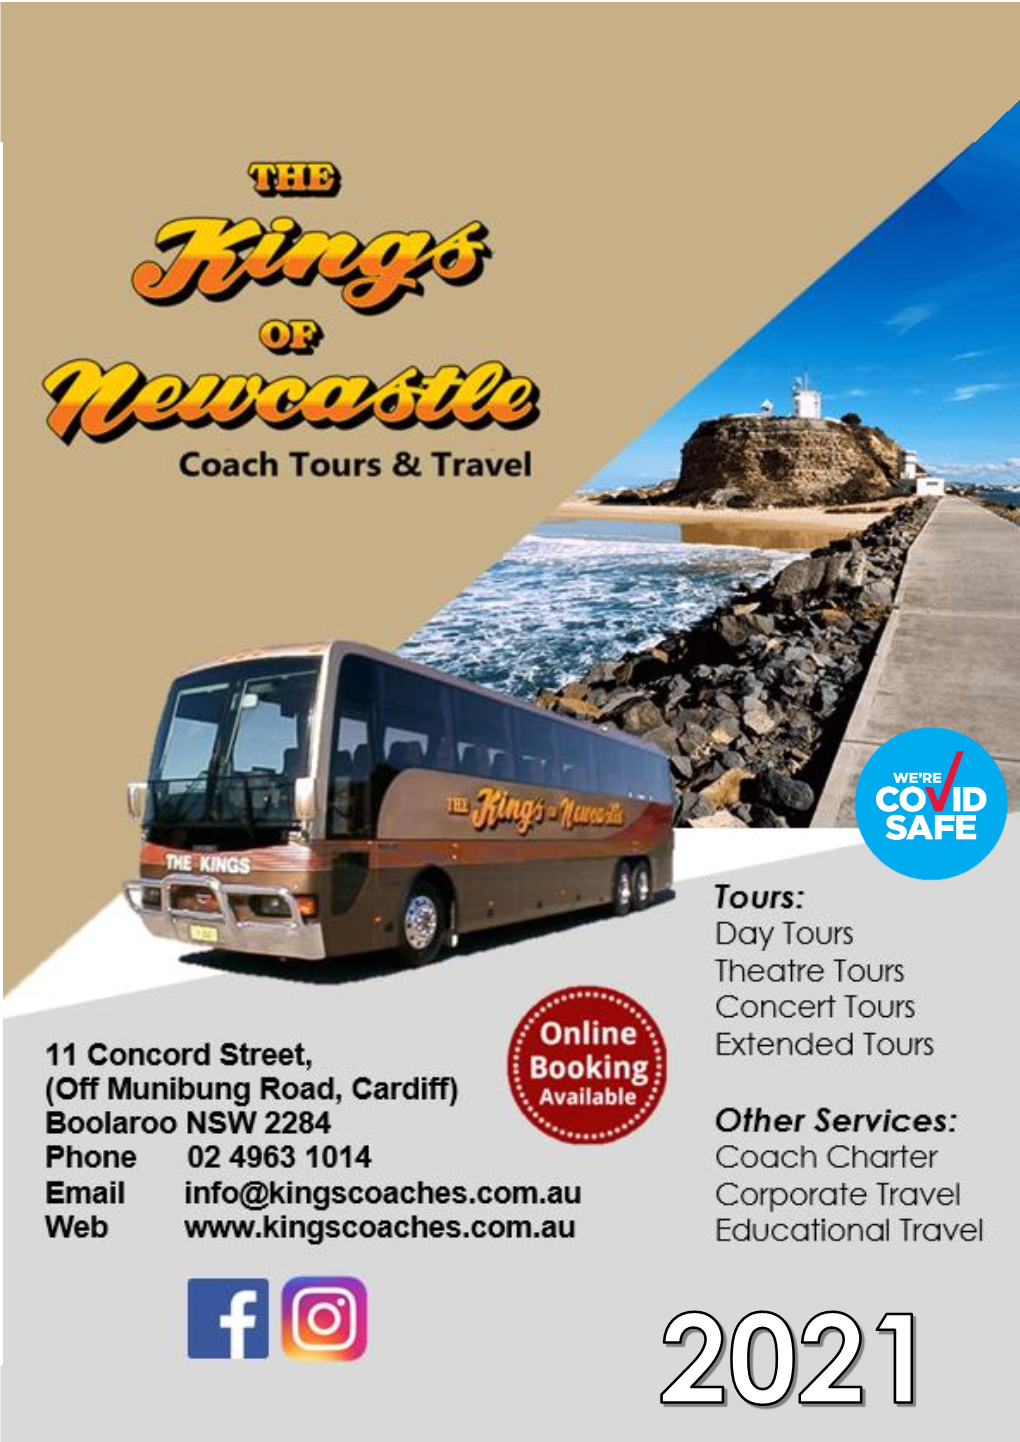 Travel with the Kings of Newcastle and Enjoy the Beauty and Fragrance of Spring in the Southern Highlands